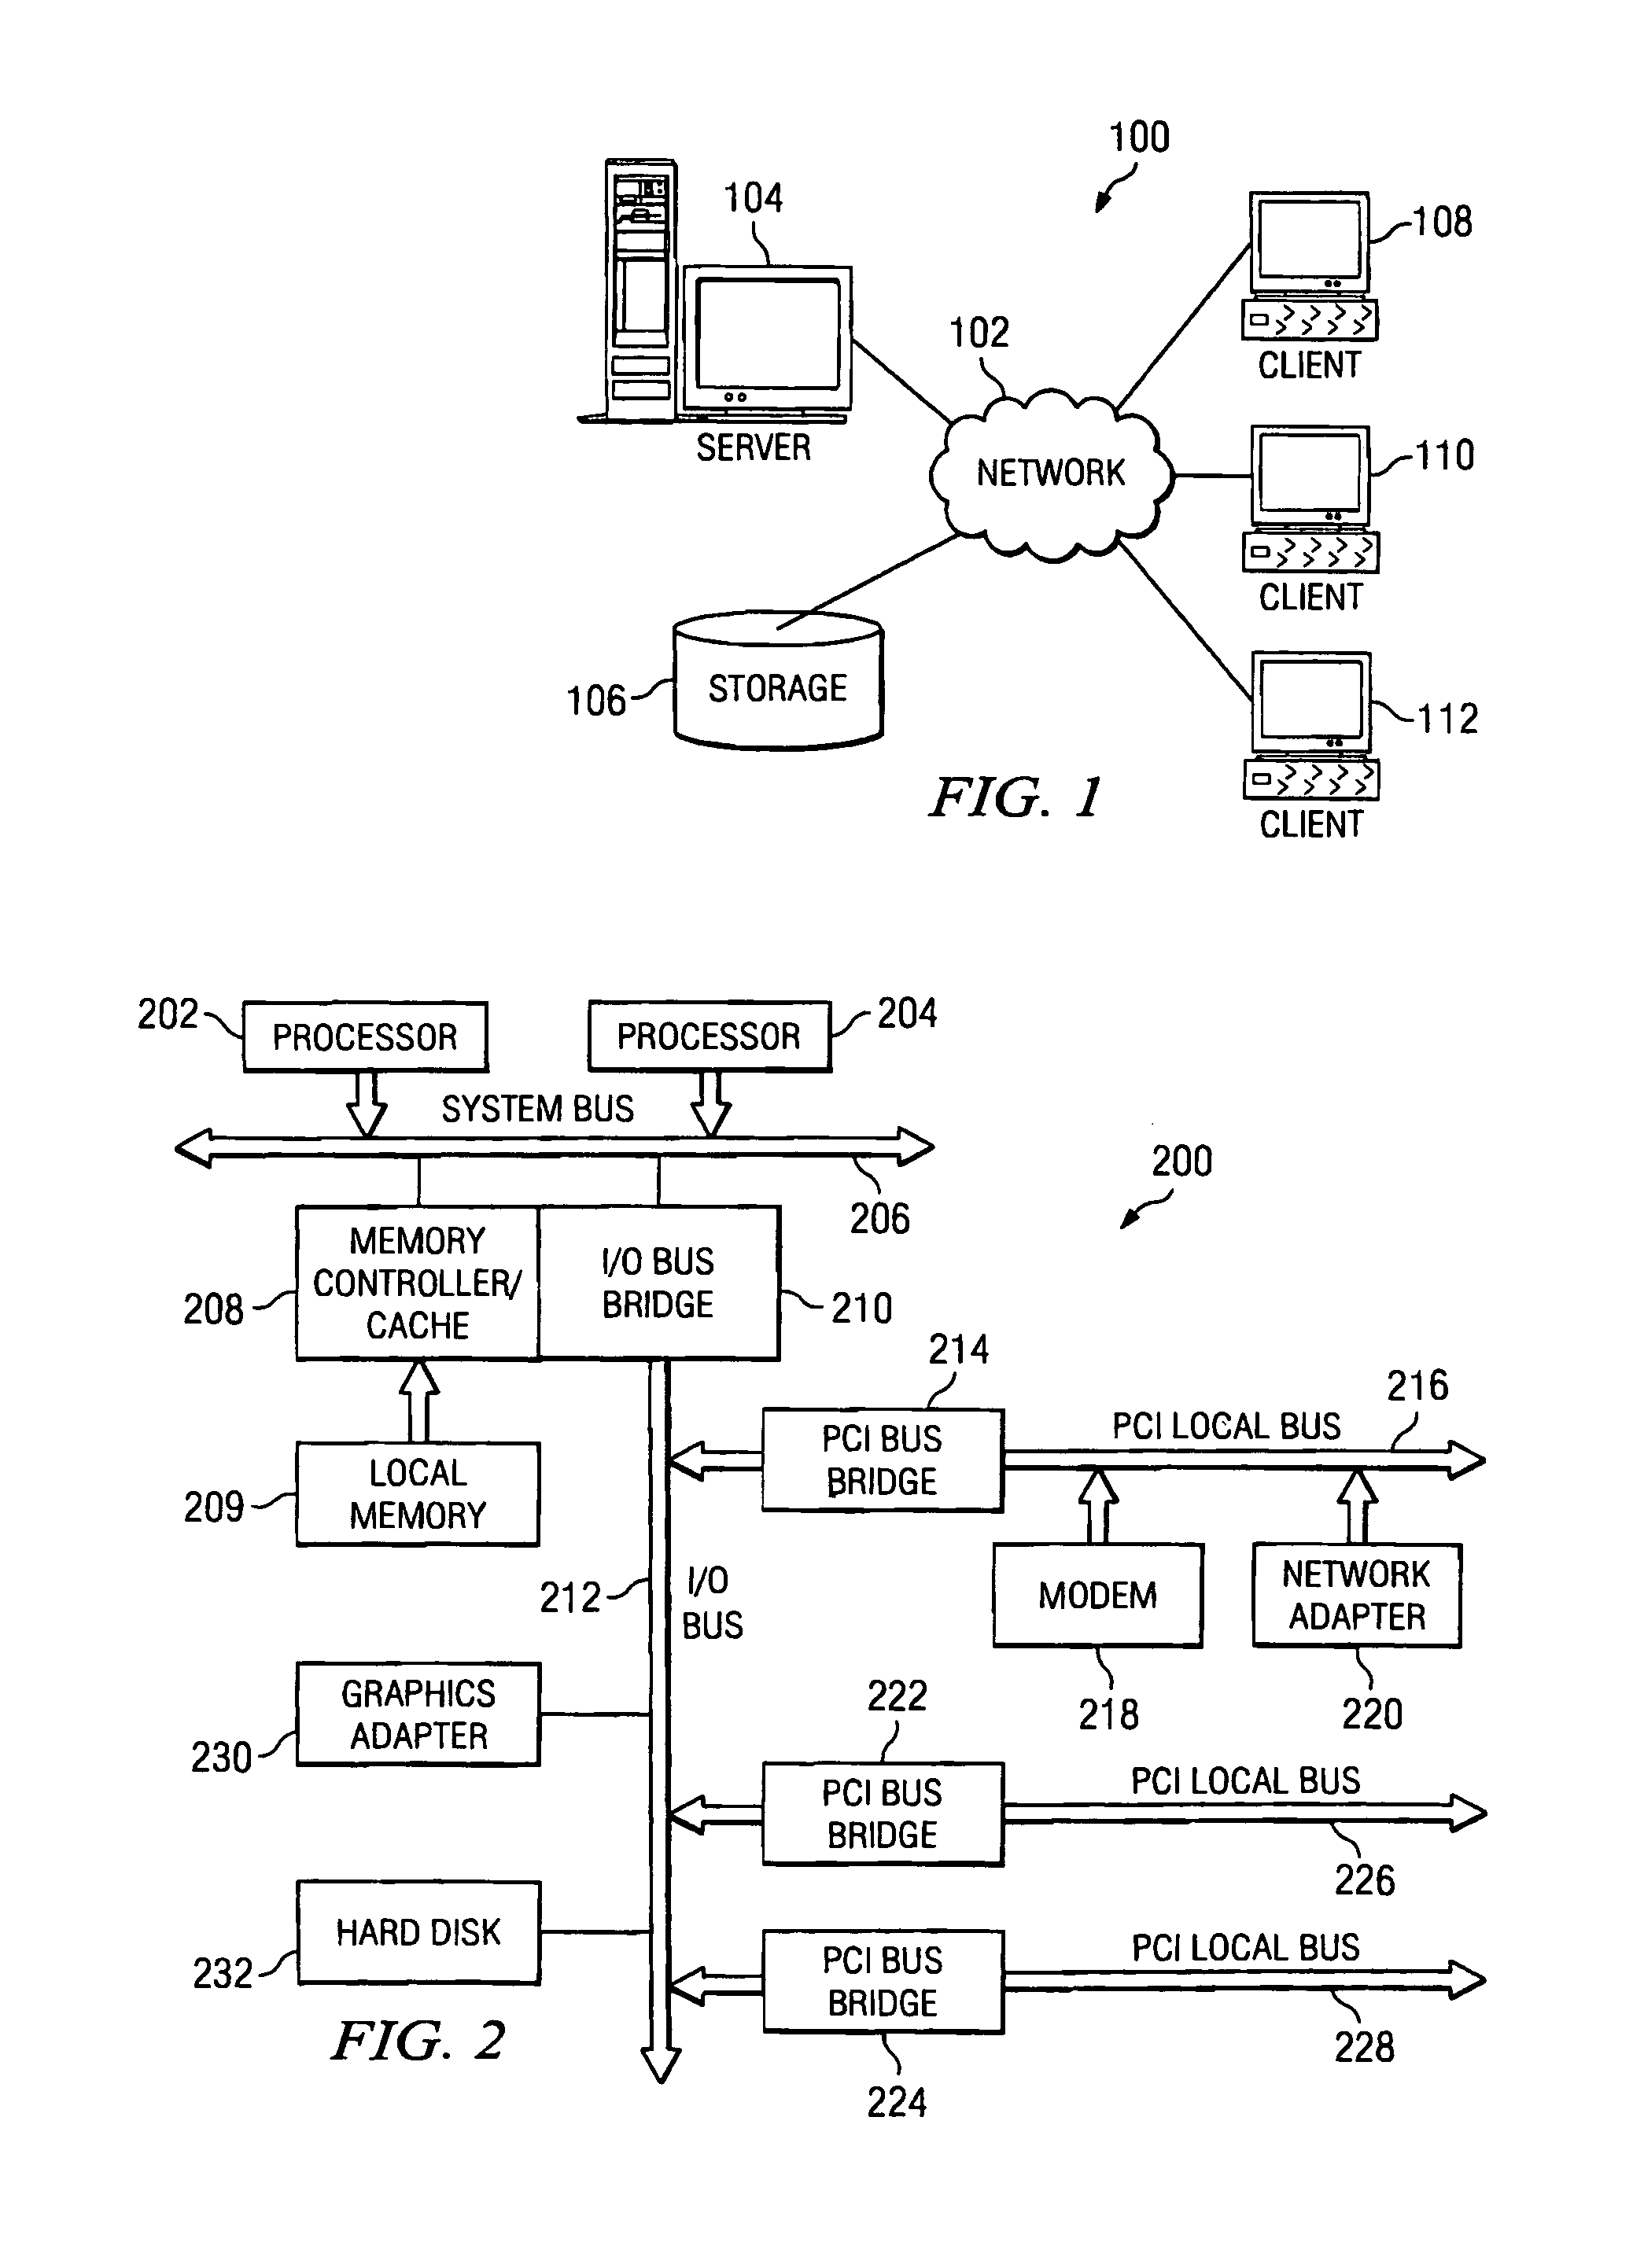 Method and apparatus for autonomic policy-based thermal management in a data processing system